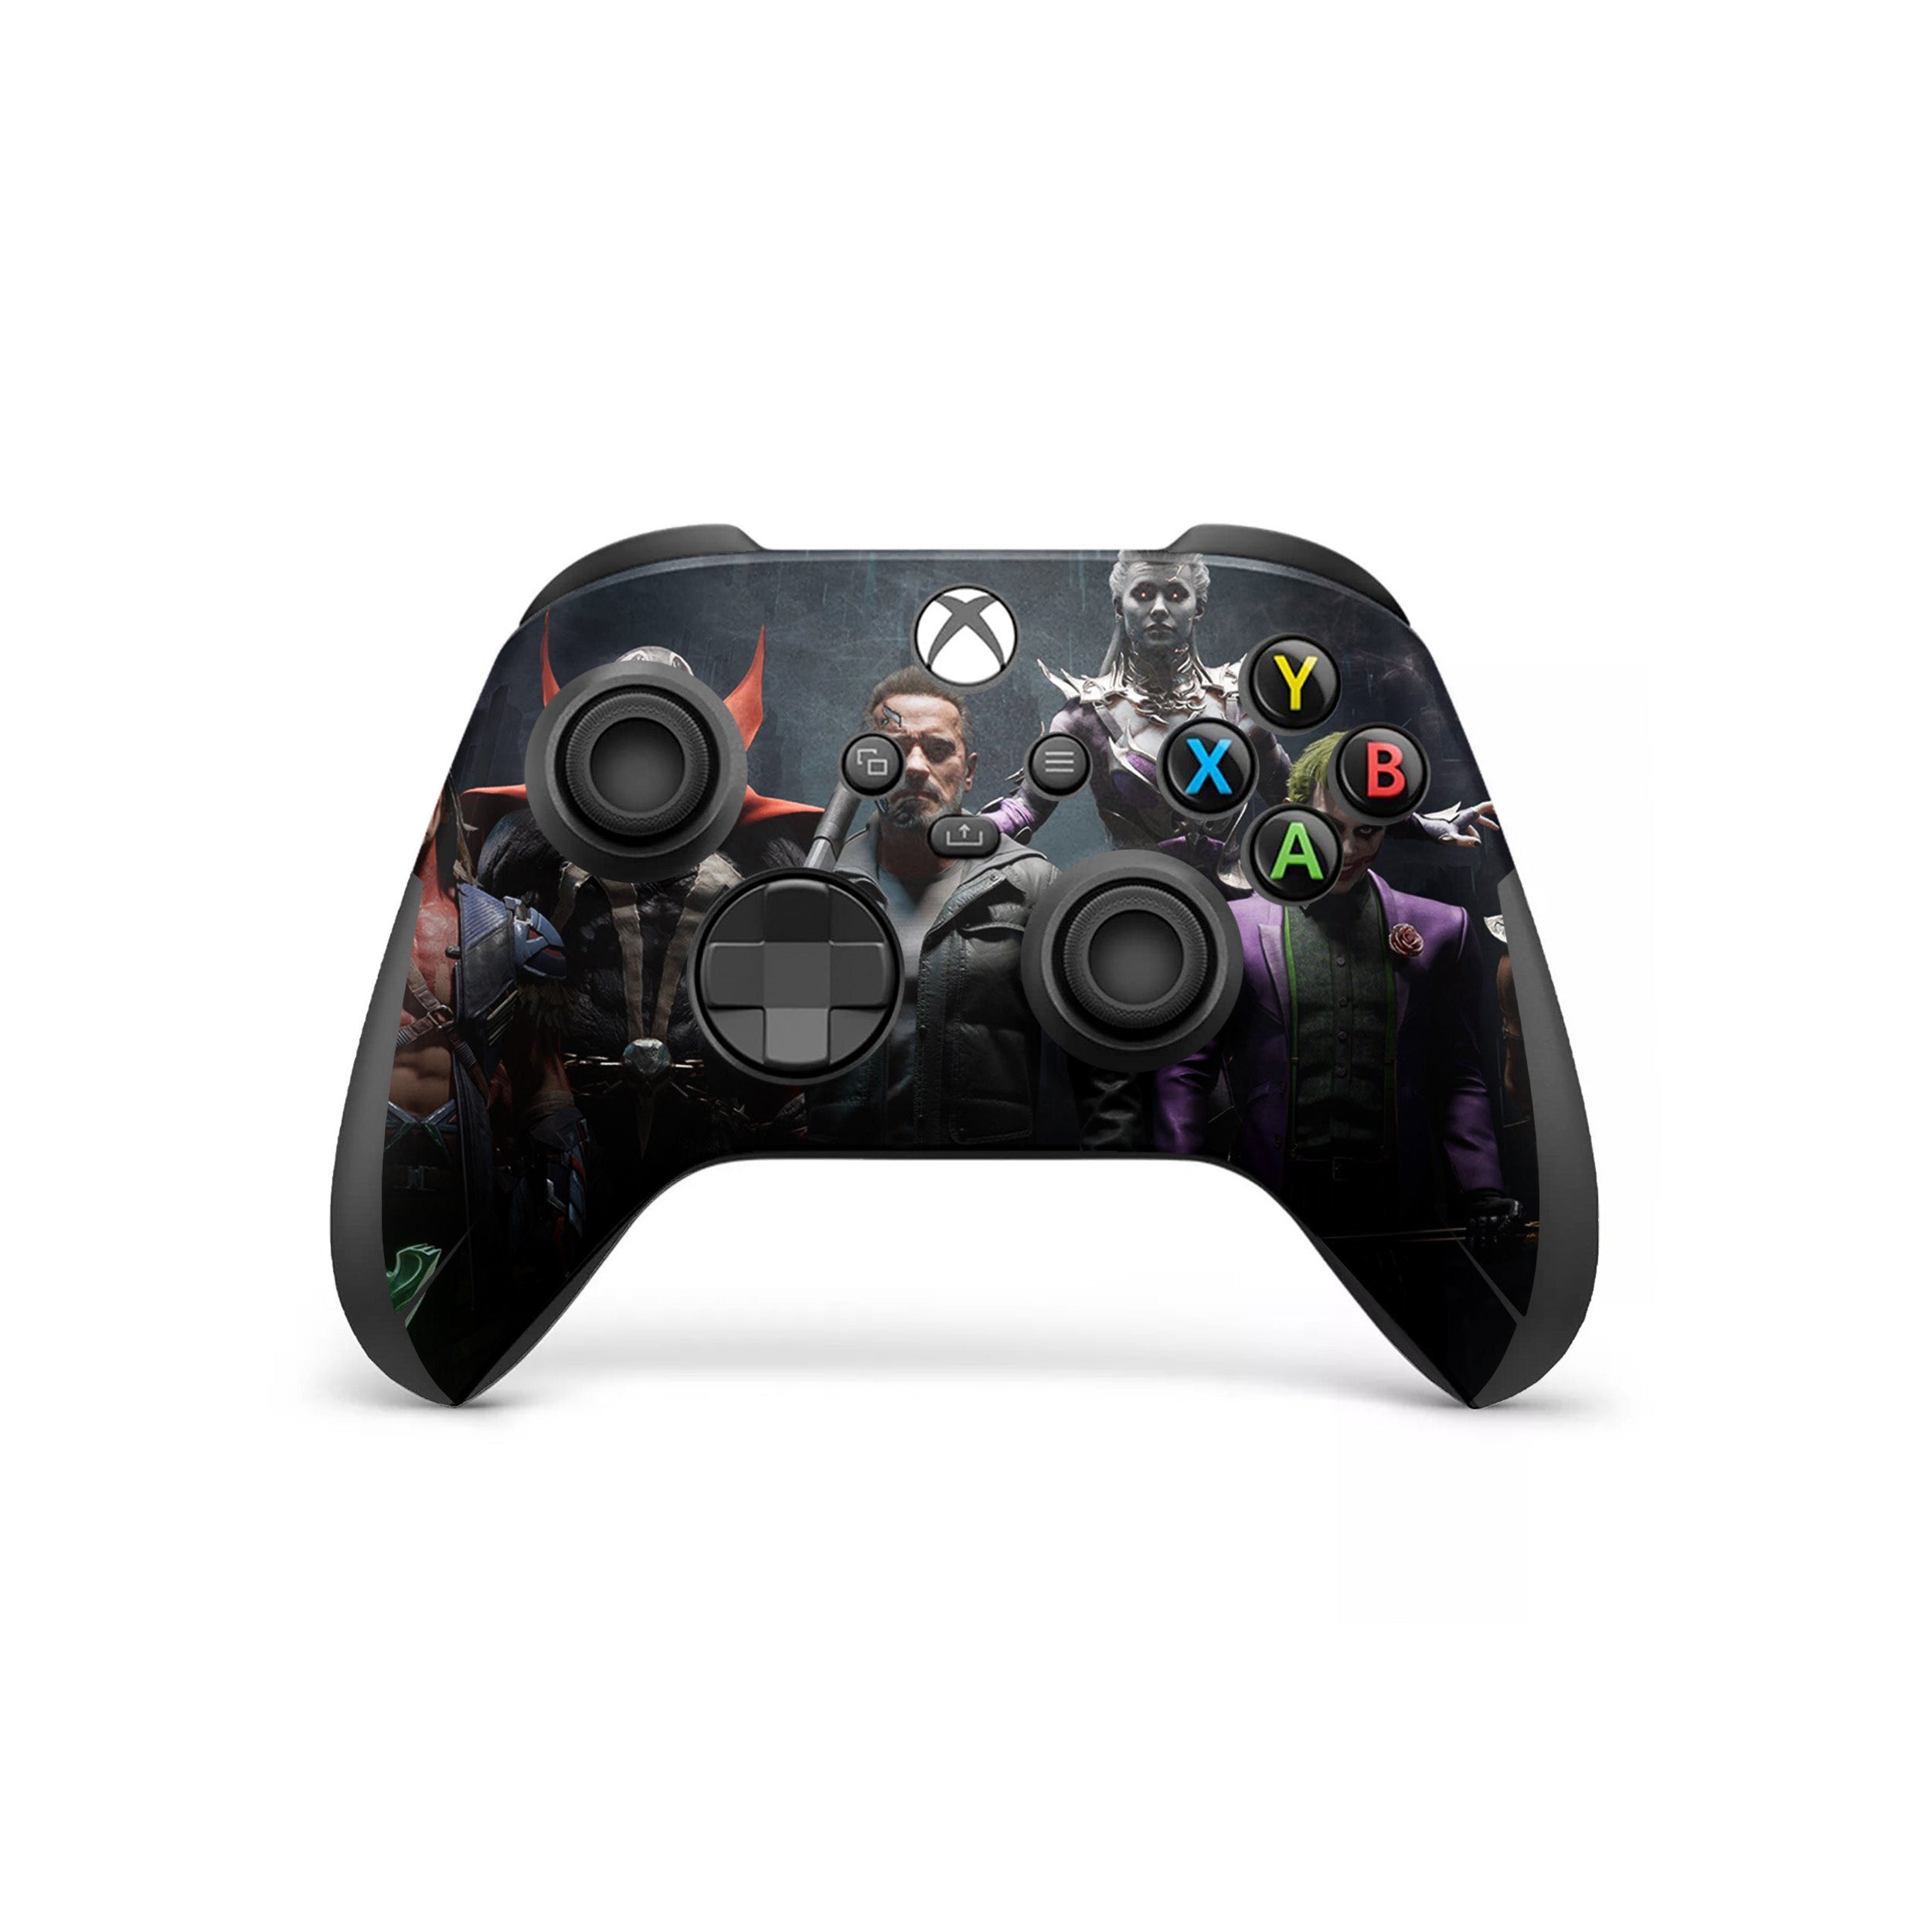 A video game skin featuring a Mortal Kombat 11 The Terminator design for the Xbox Wireless Controller.